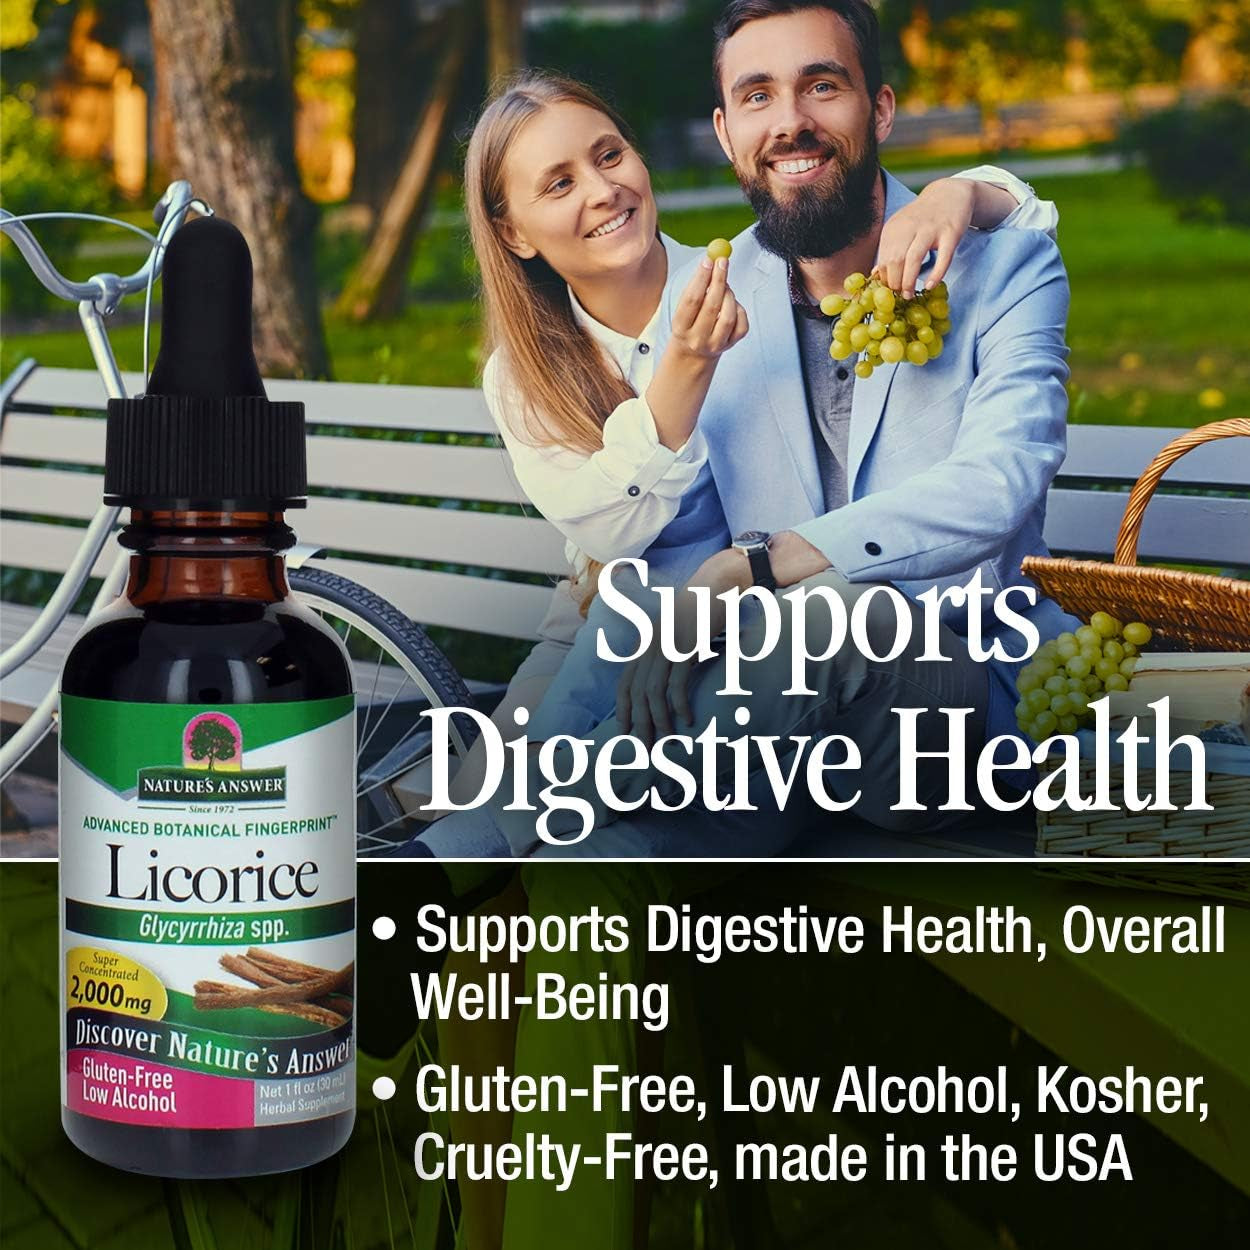 Nature'S Answer Organic Low Alcohol Licorice Root 2000Mg 1Oz Extract | Digestion Support | Natural Immune Booster | Promotes Lung Function | Gluten-Free, Non-Gmo, Vegan | Single Count